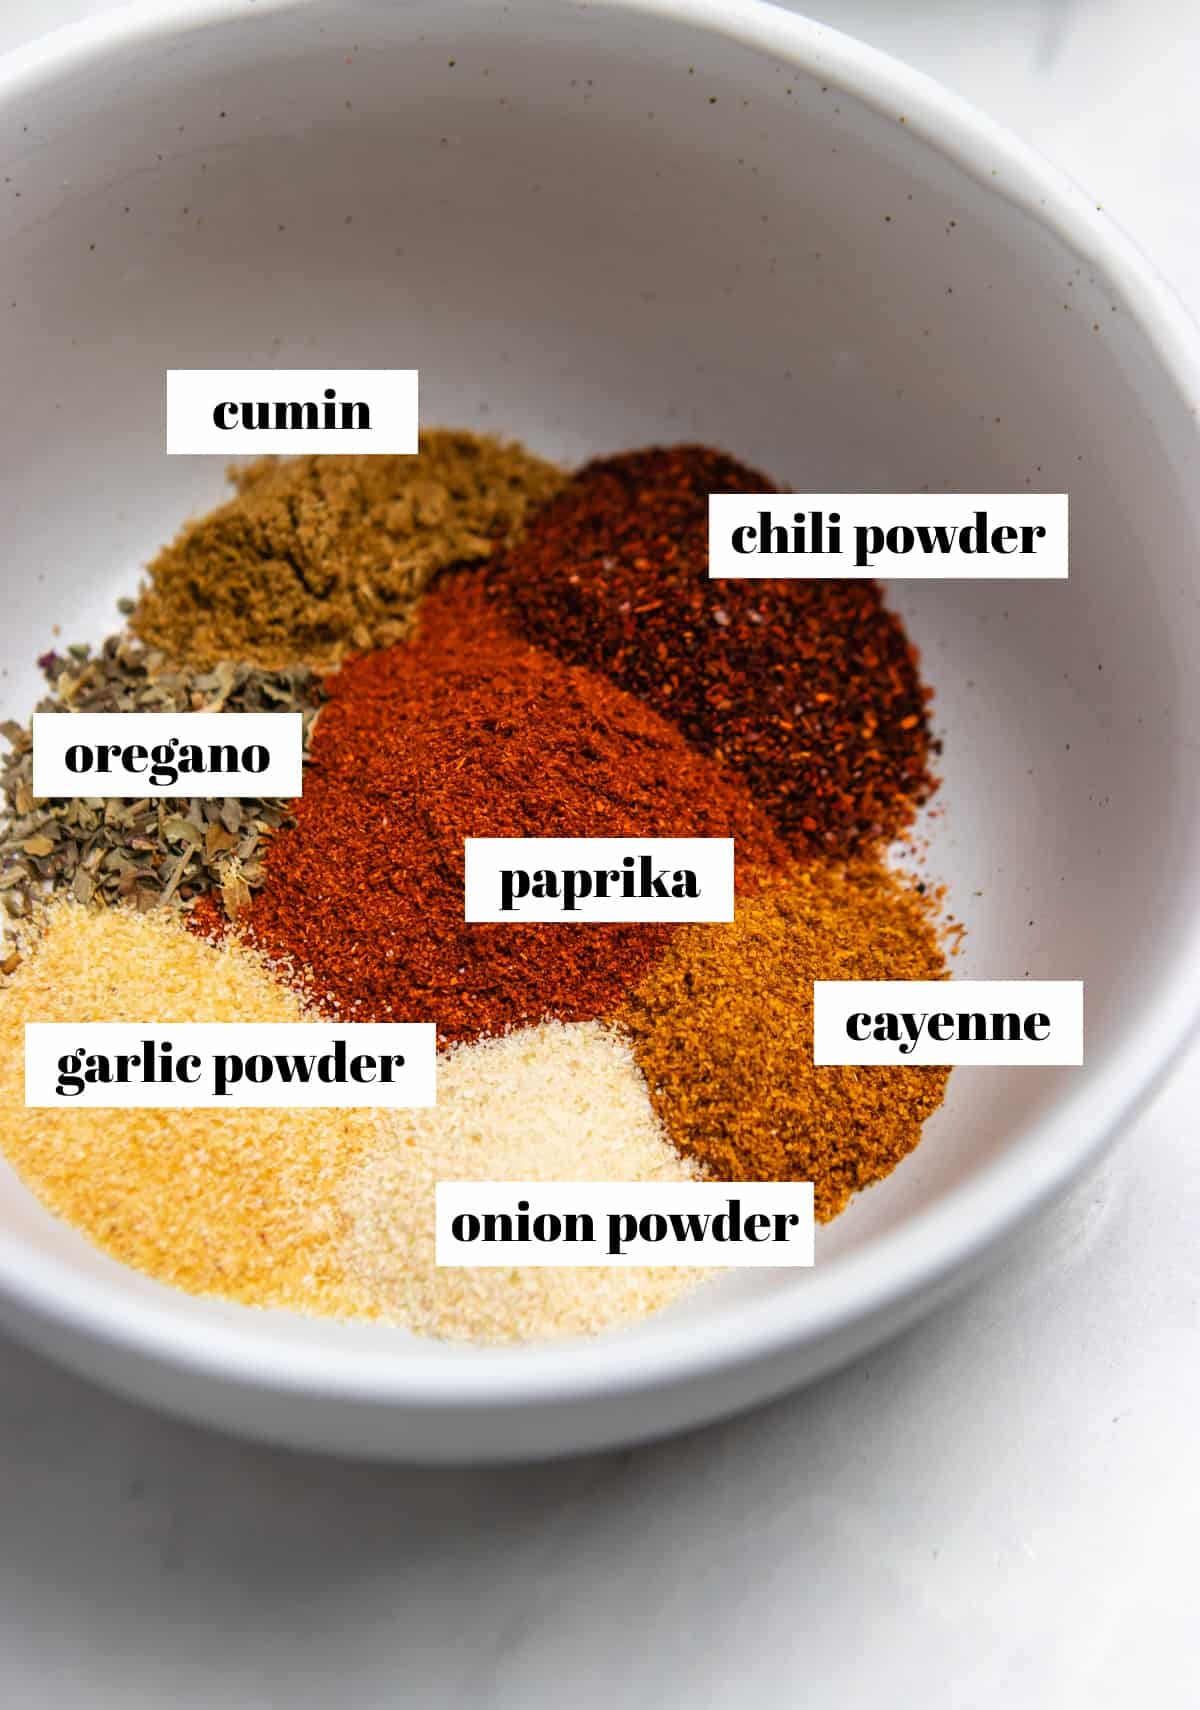 Cayenne, chili powder, oregano, and other spices in bowl.